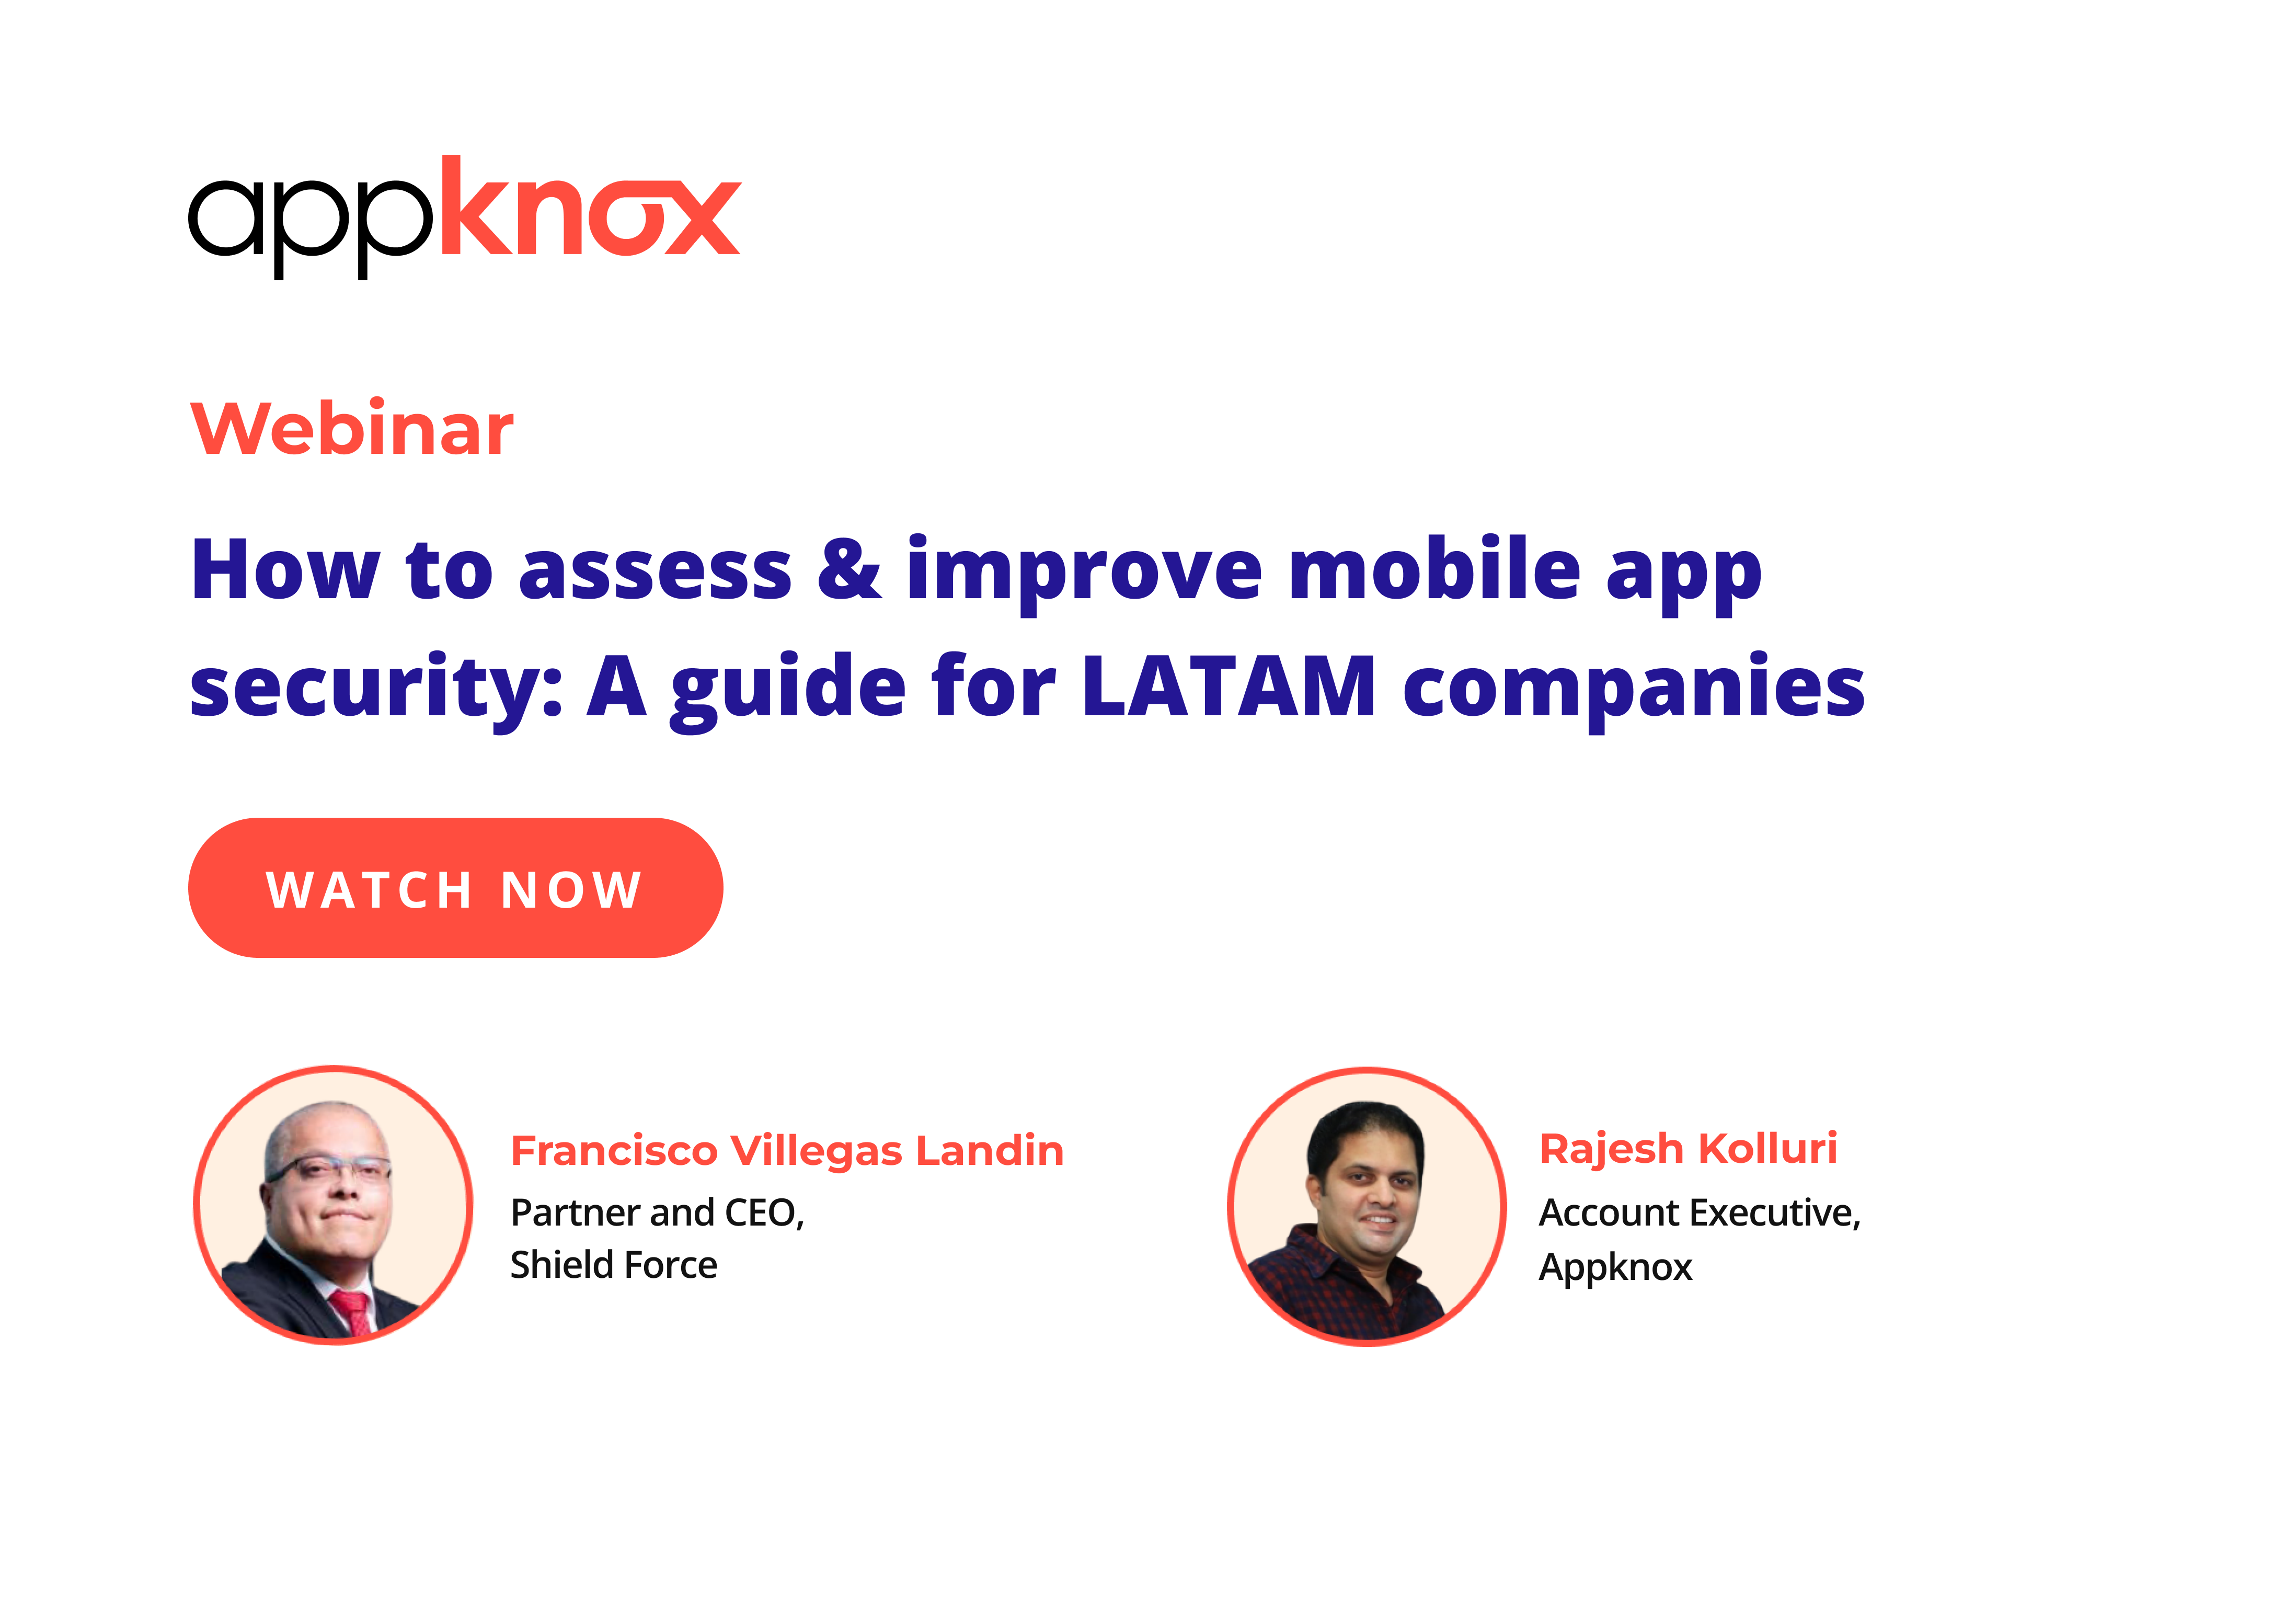 Learn more about cyber and mobile application security with Appknox's mobile security resources - Appknox webinars